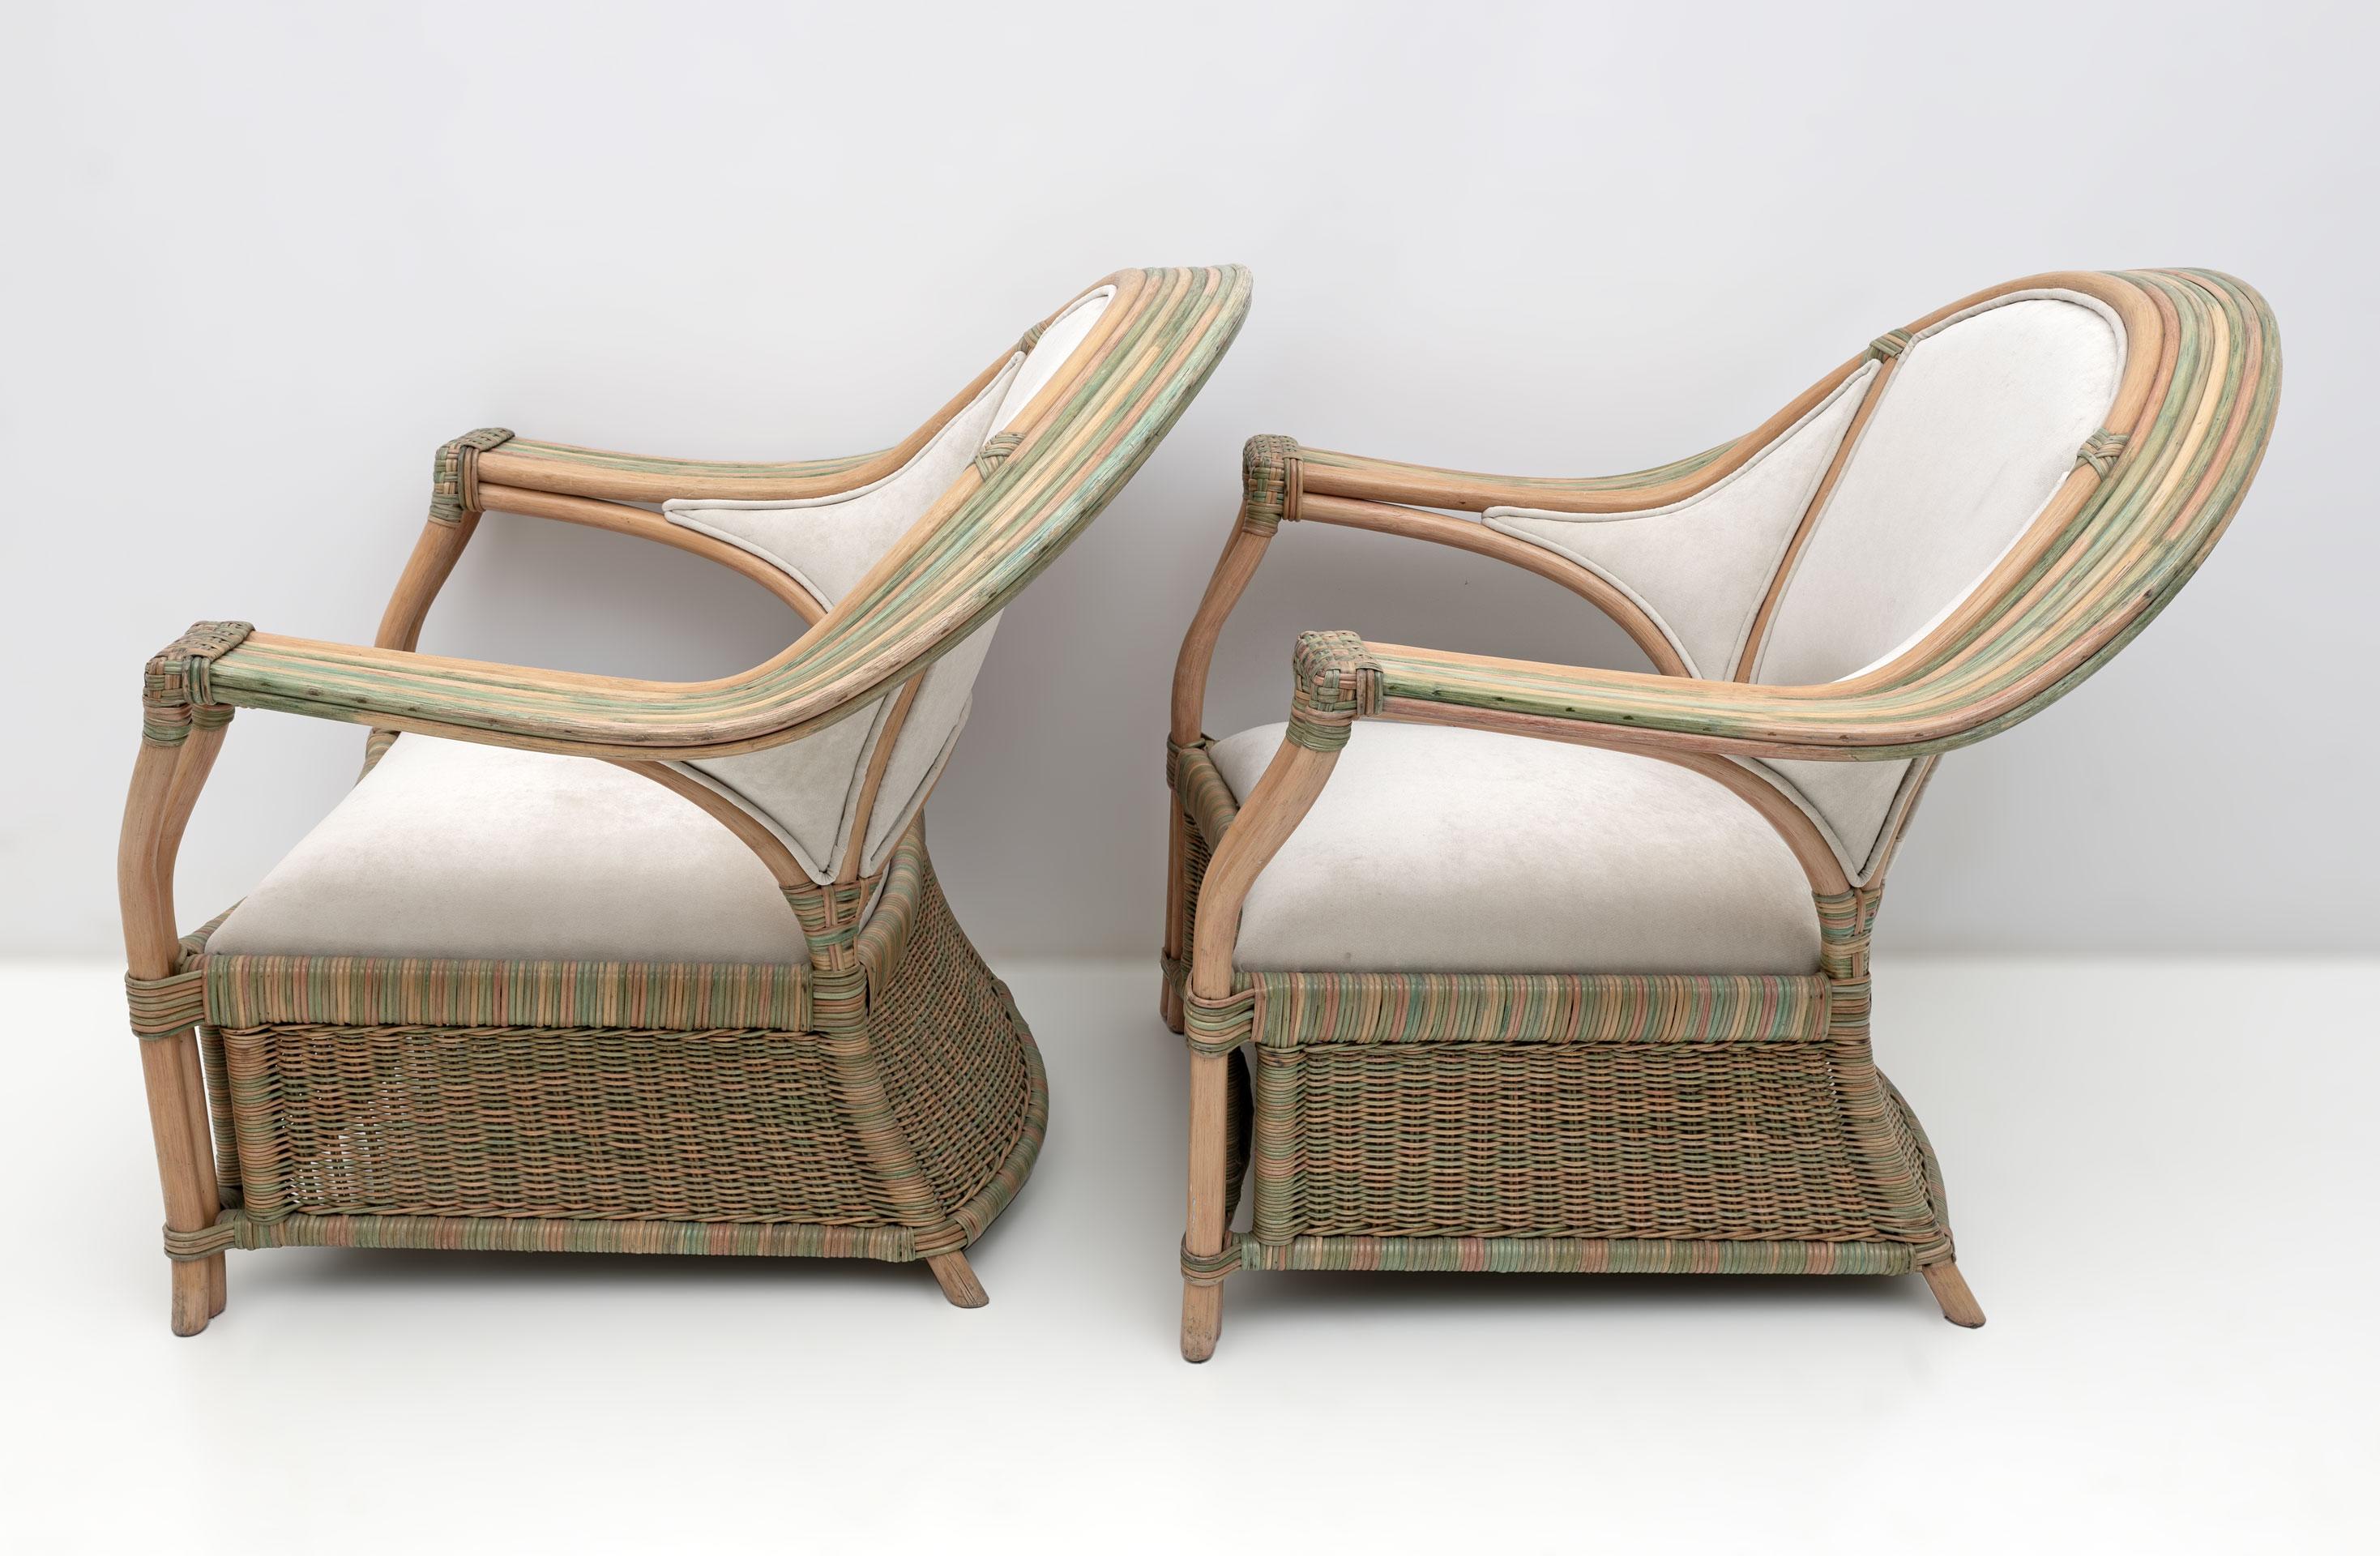 Late 20th Century Pair of Mid-century Modern Italian Rattan and Wicker Armchairs, 1970s For Sale